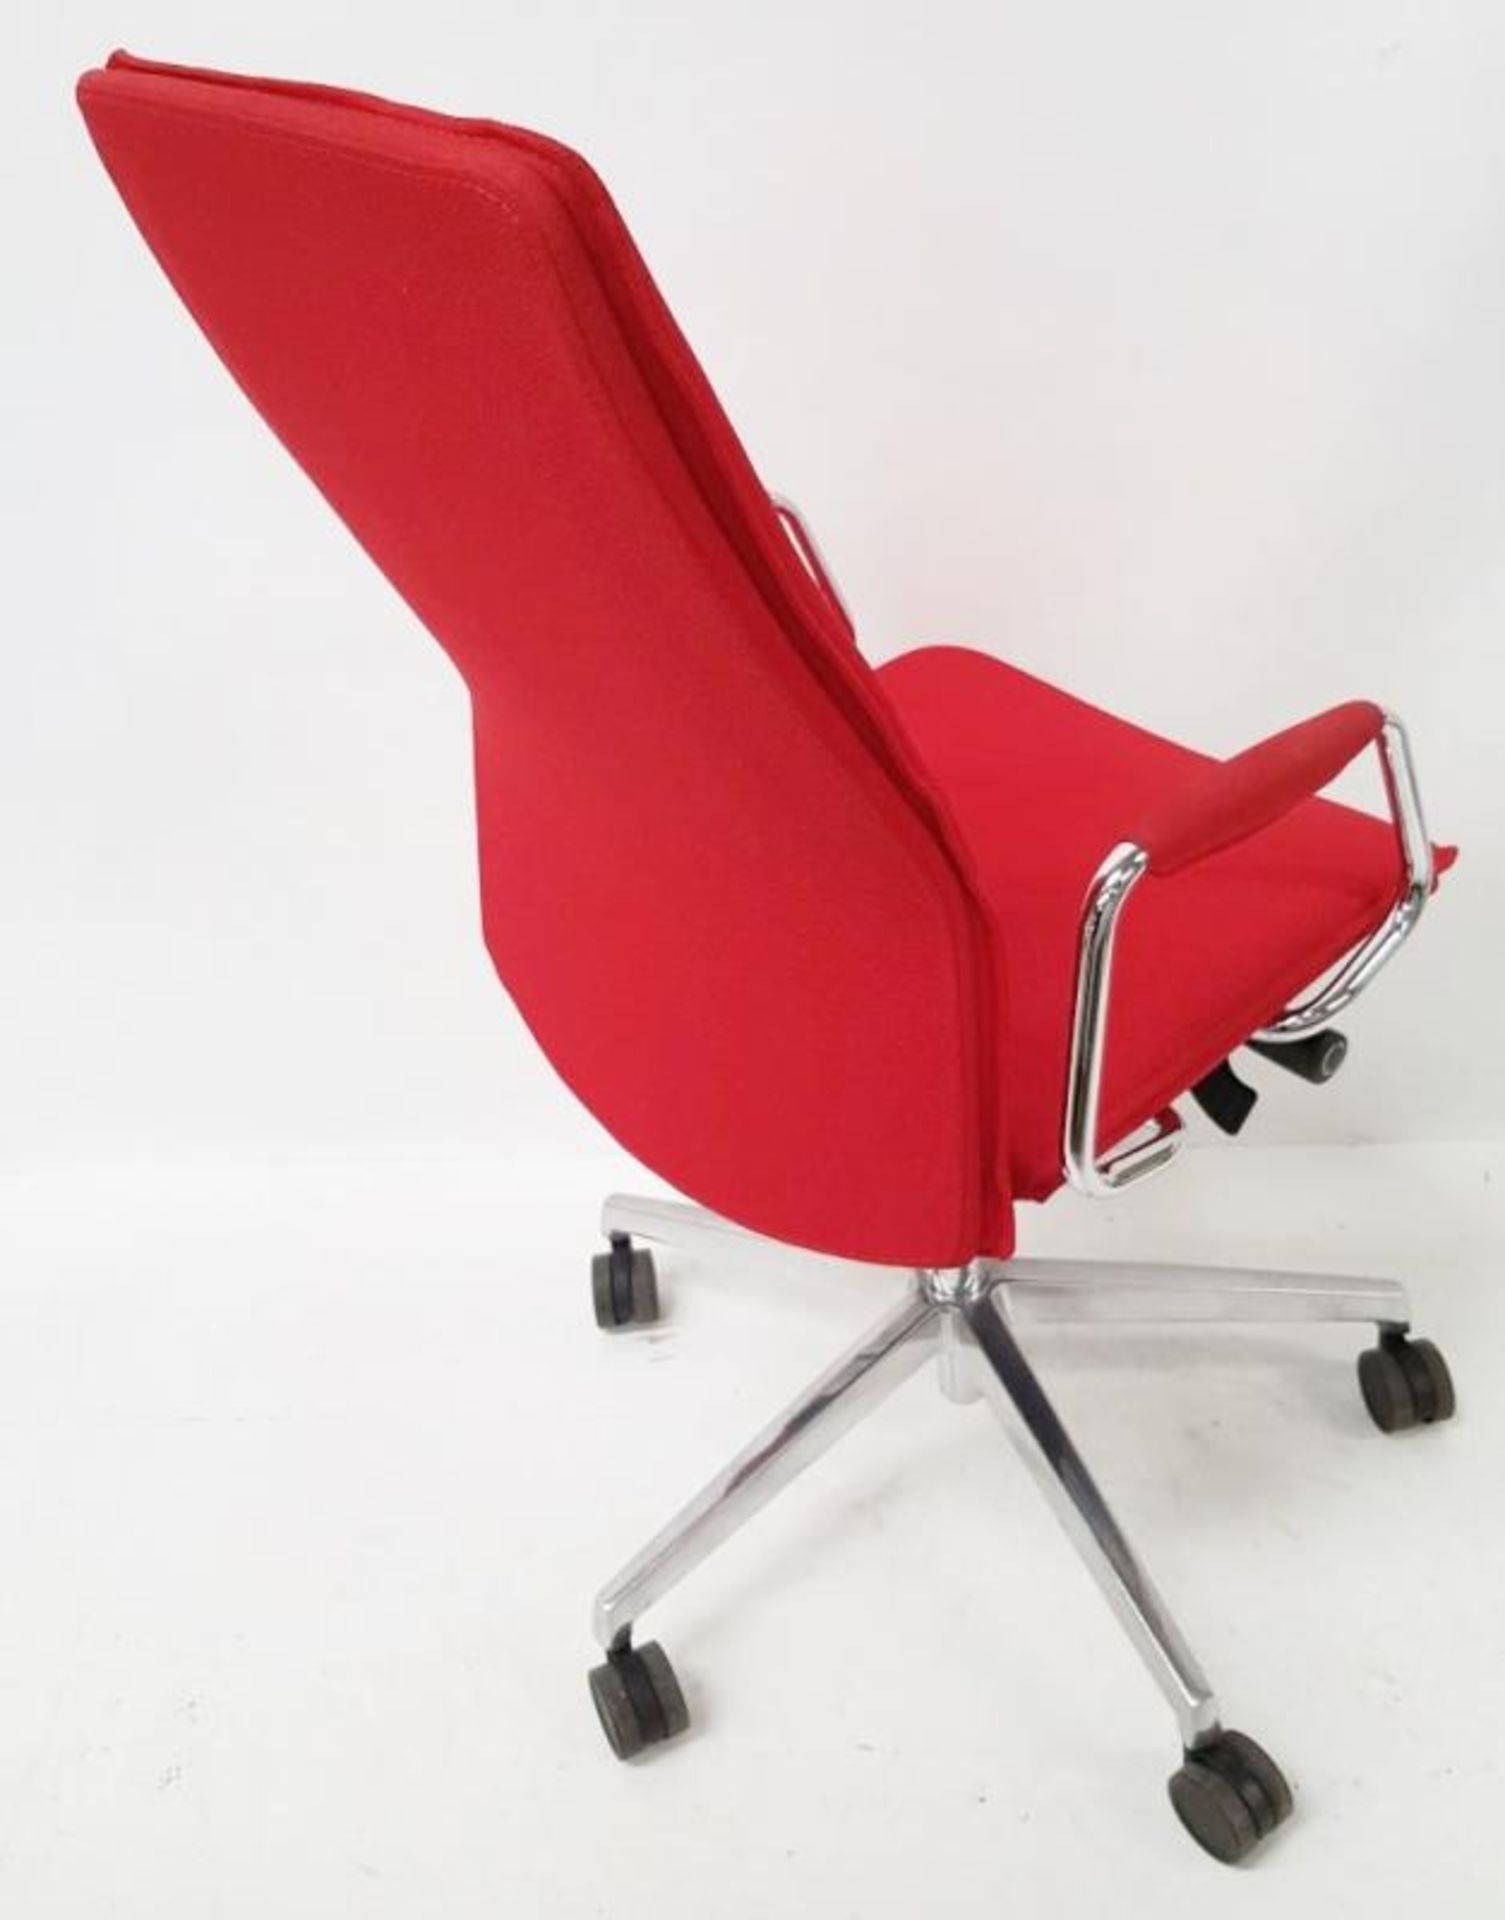 1 x 'Sven Christiansen' Premium Designer High-back Office Chair In Red (HBB1HA) - Used, In Very Good - Image 7 of 7